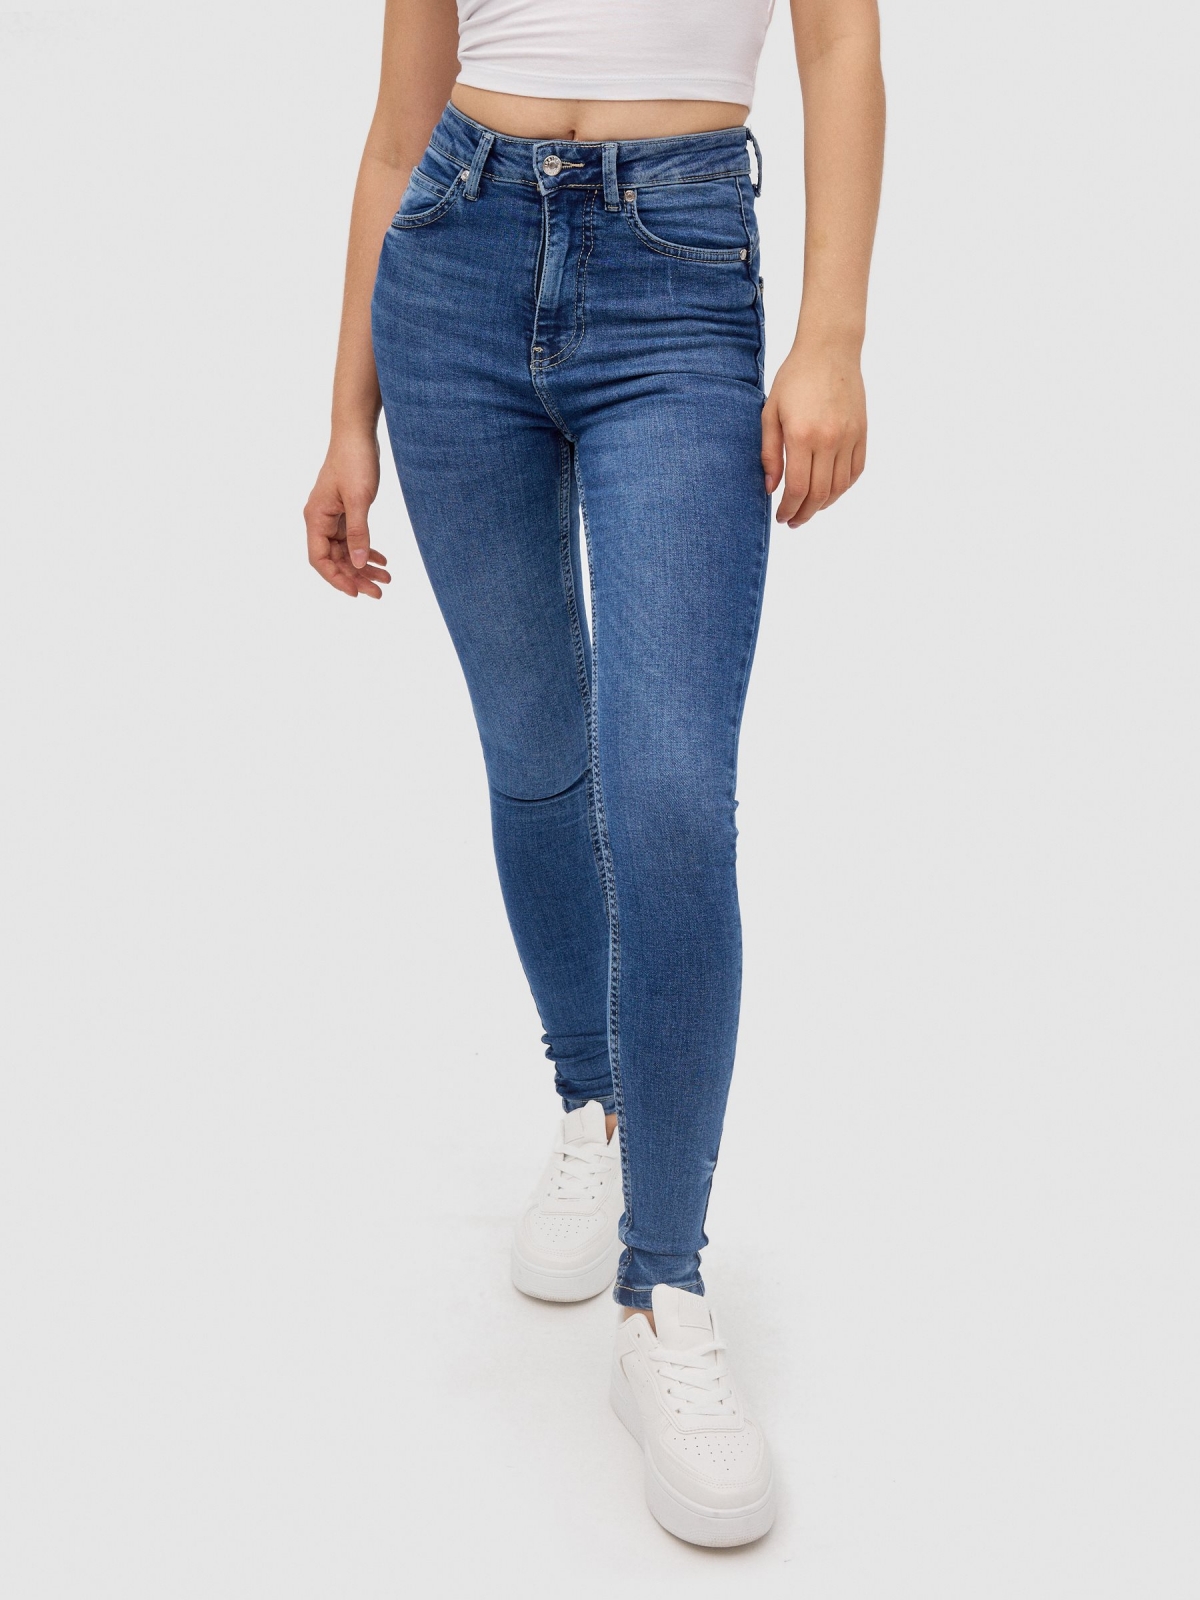 Skinny push up jeans blue middle front view